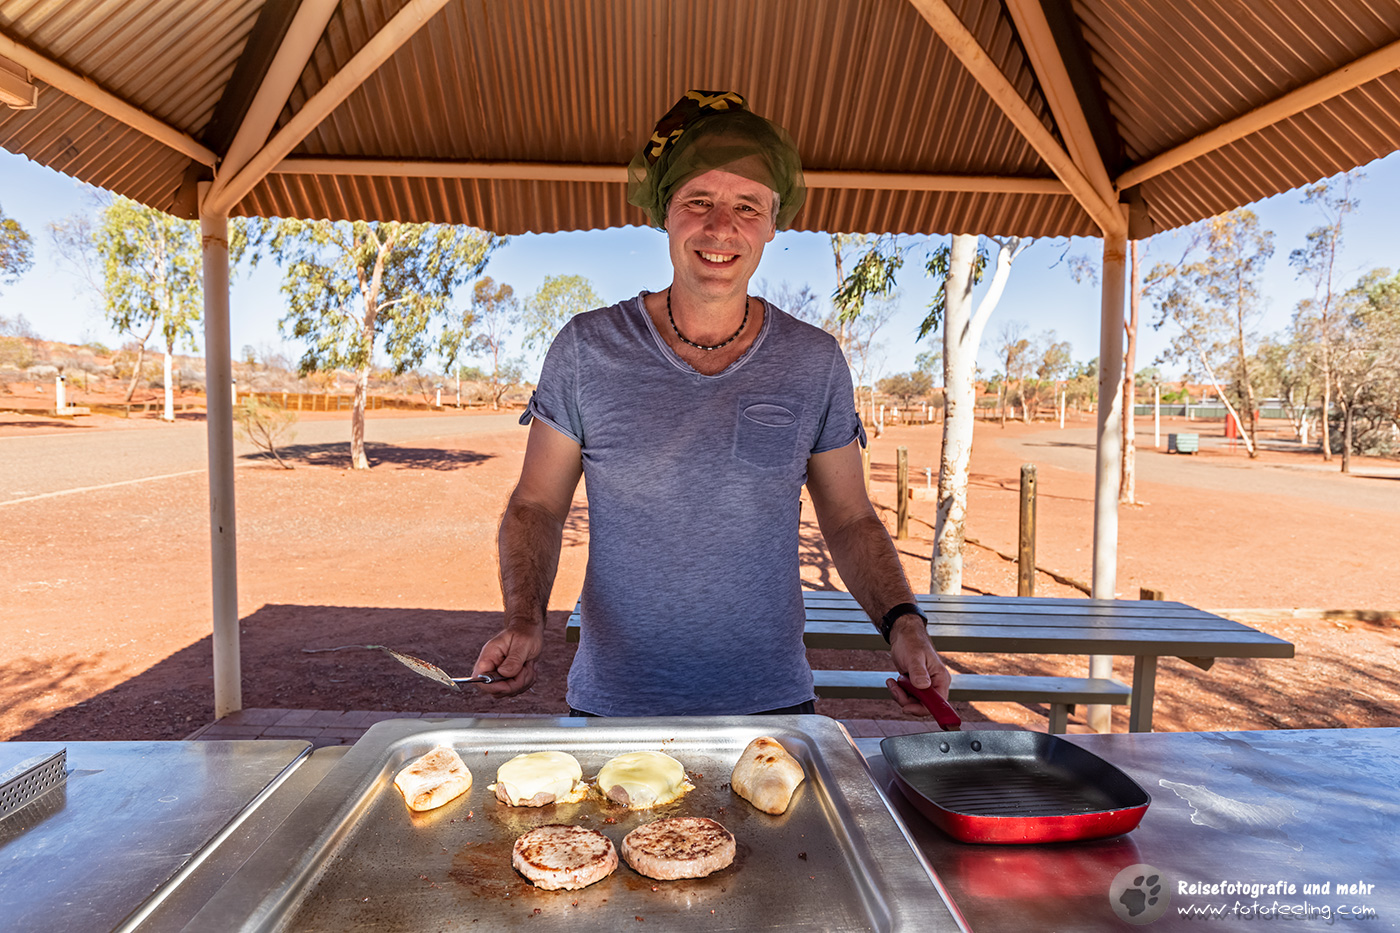 Chris am Grill, Ayers Rock Campground, Northern Territory, Australien